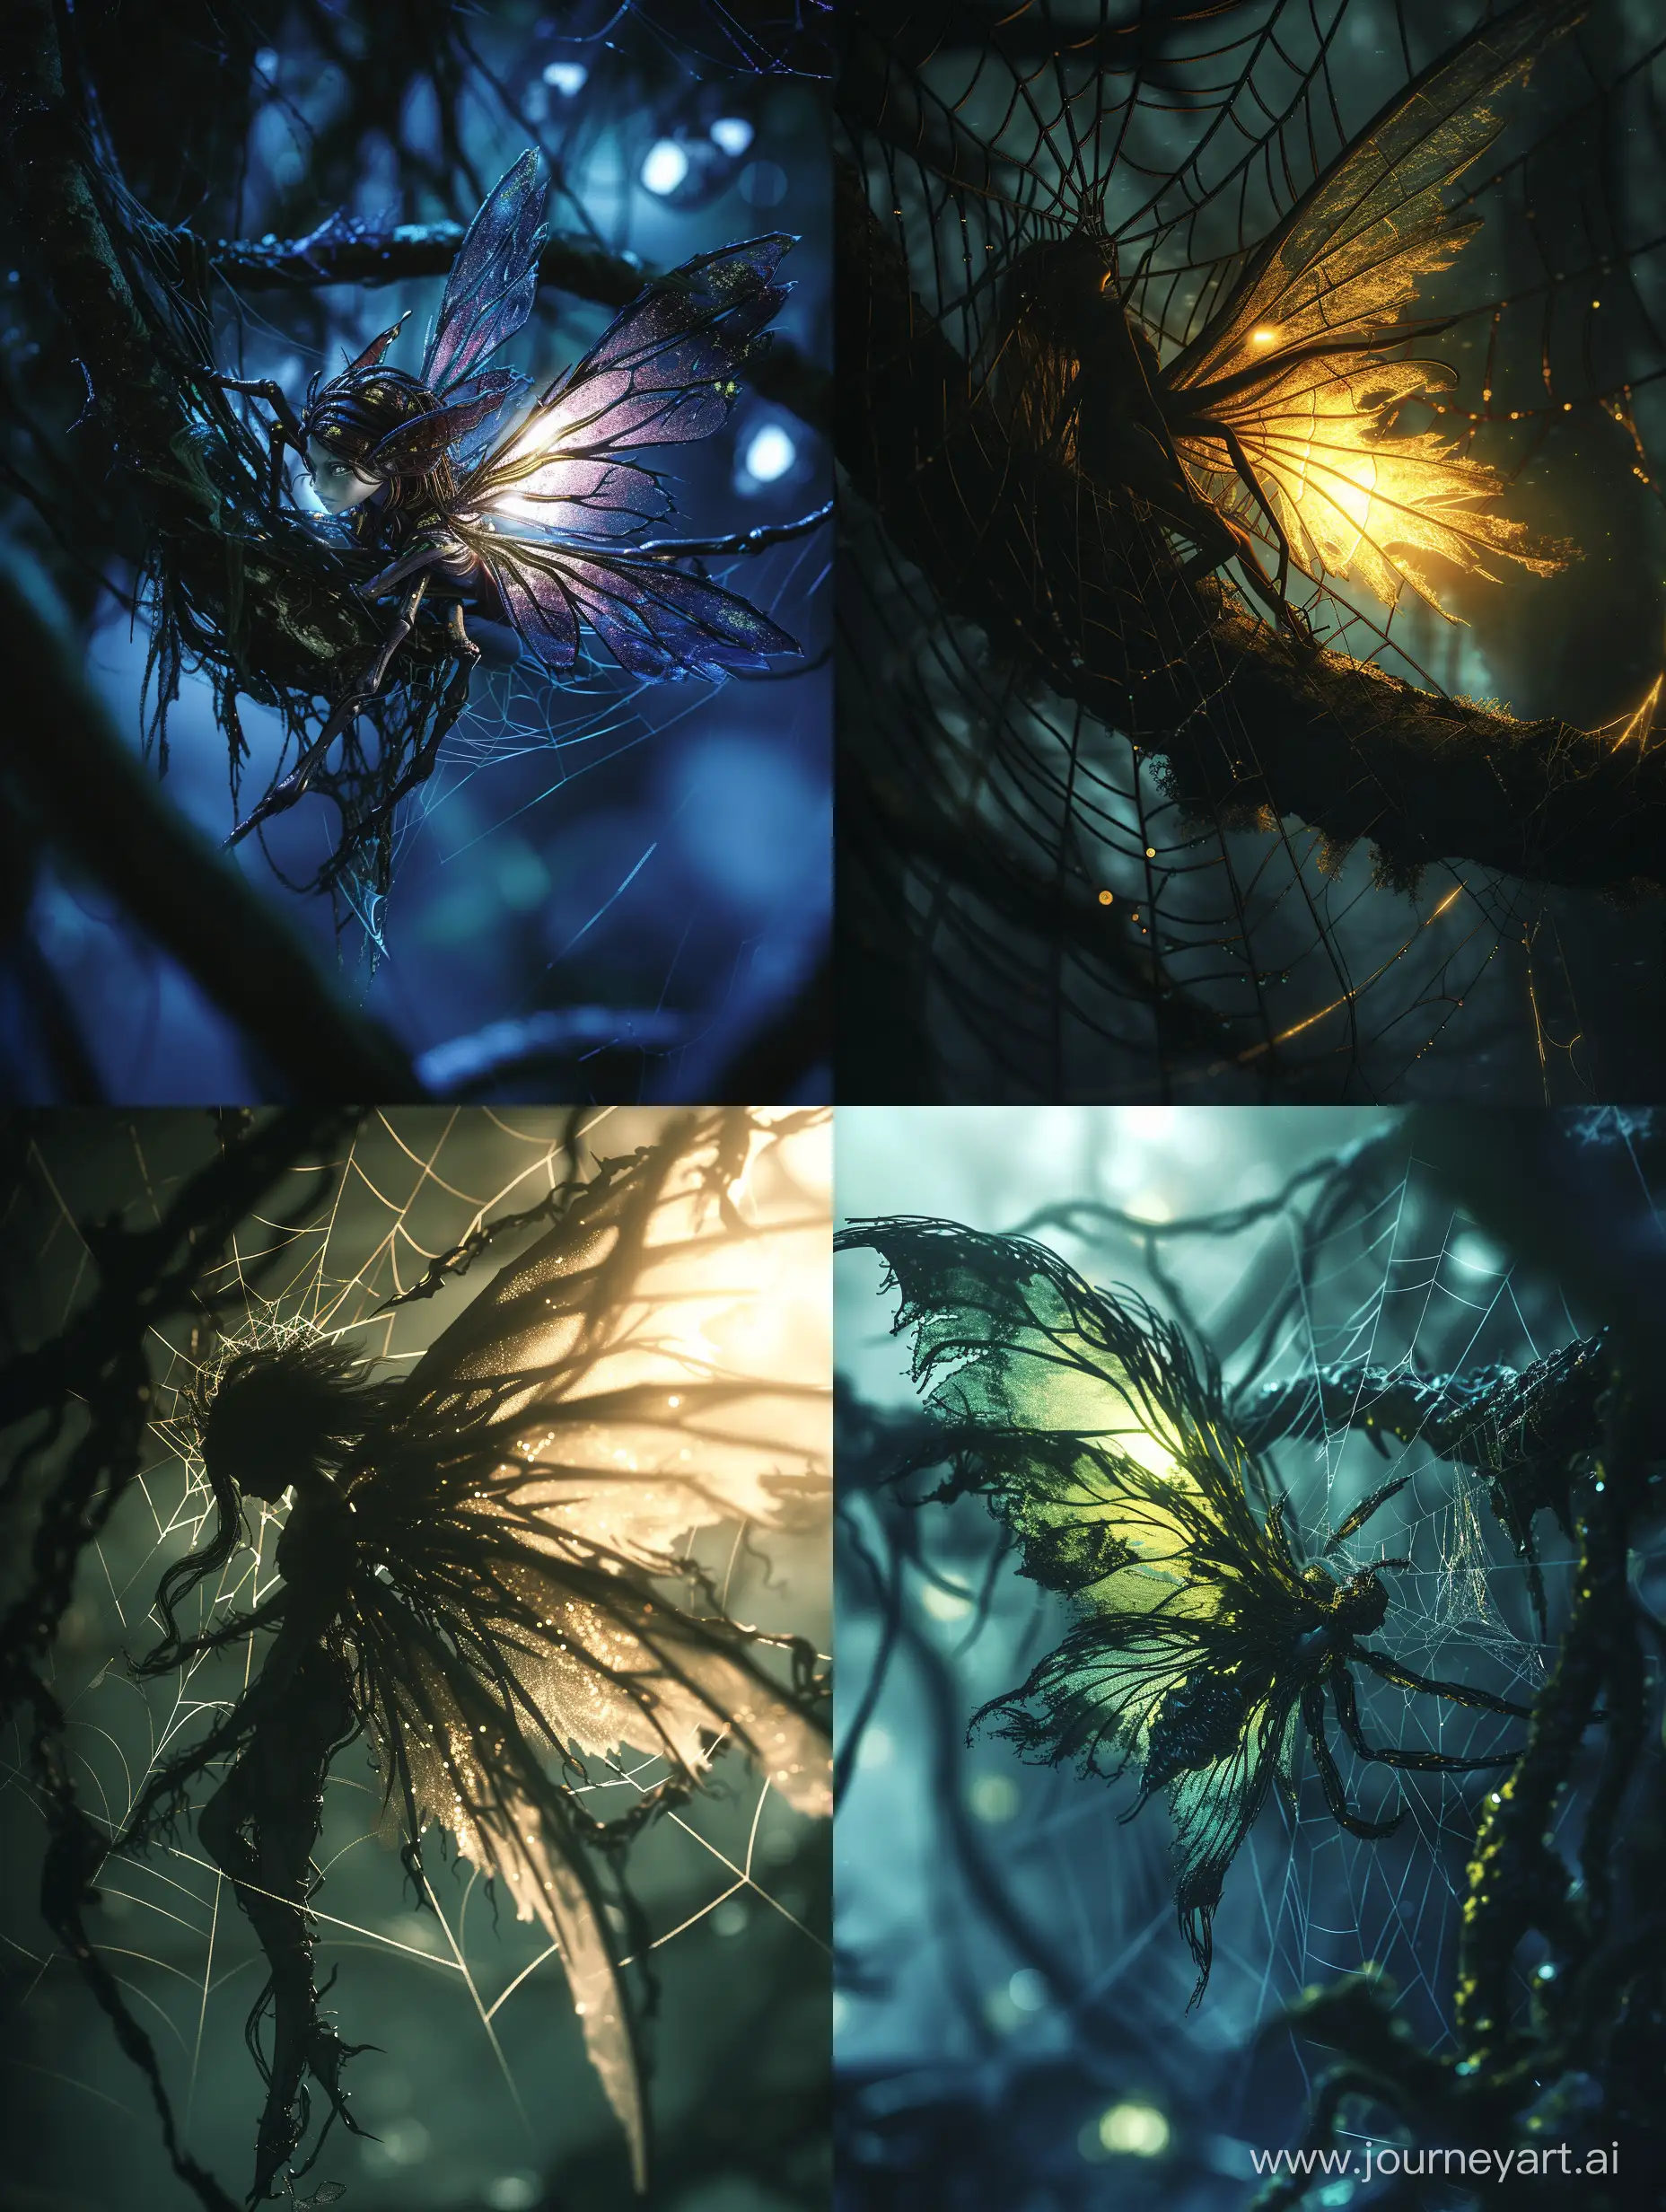 Wide angle of a dim luminous fairy caught in a spiderweb
lol, front illumination only, tattered wings, fantasy illustration,2.5D, 16k resolution photorealistic, a masterpiece, breathtaking intricate details, reflective catchlights, high quality Pl